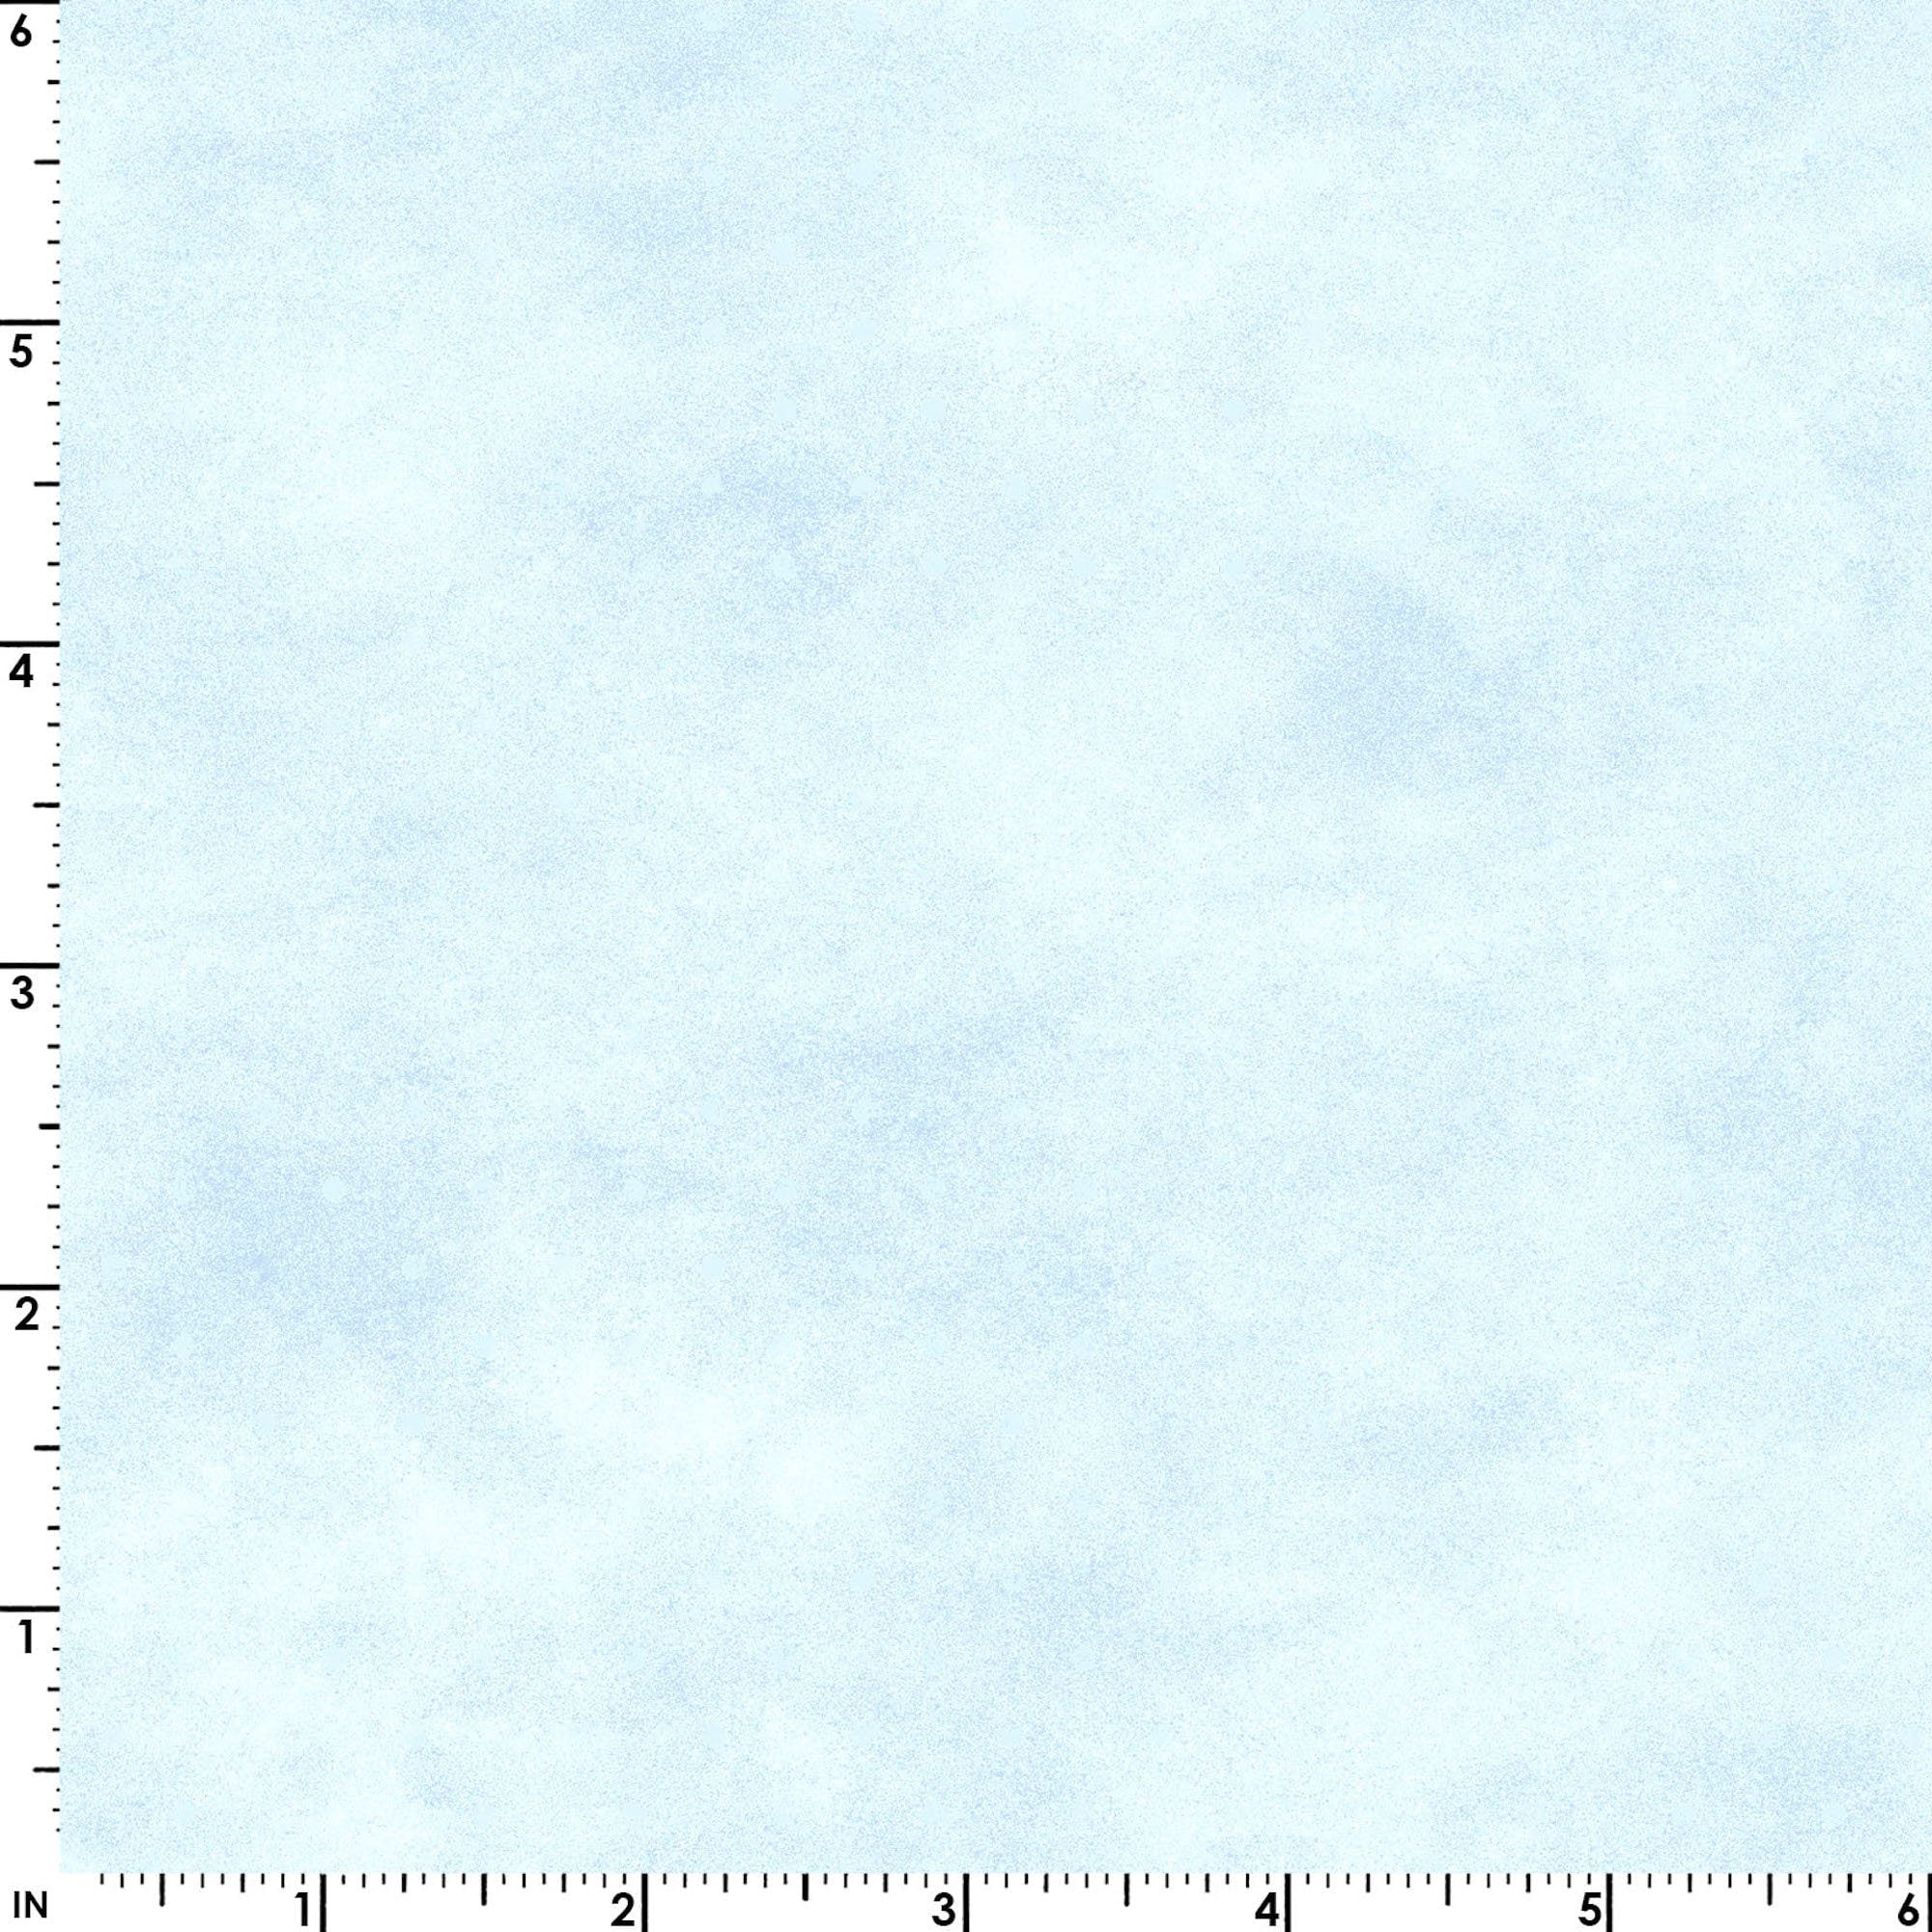 Manufacturer photo with a ruler on both sides.